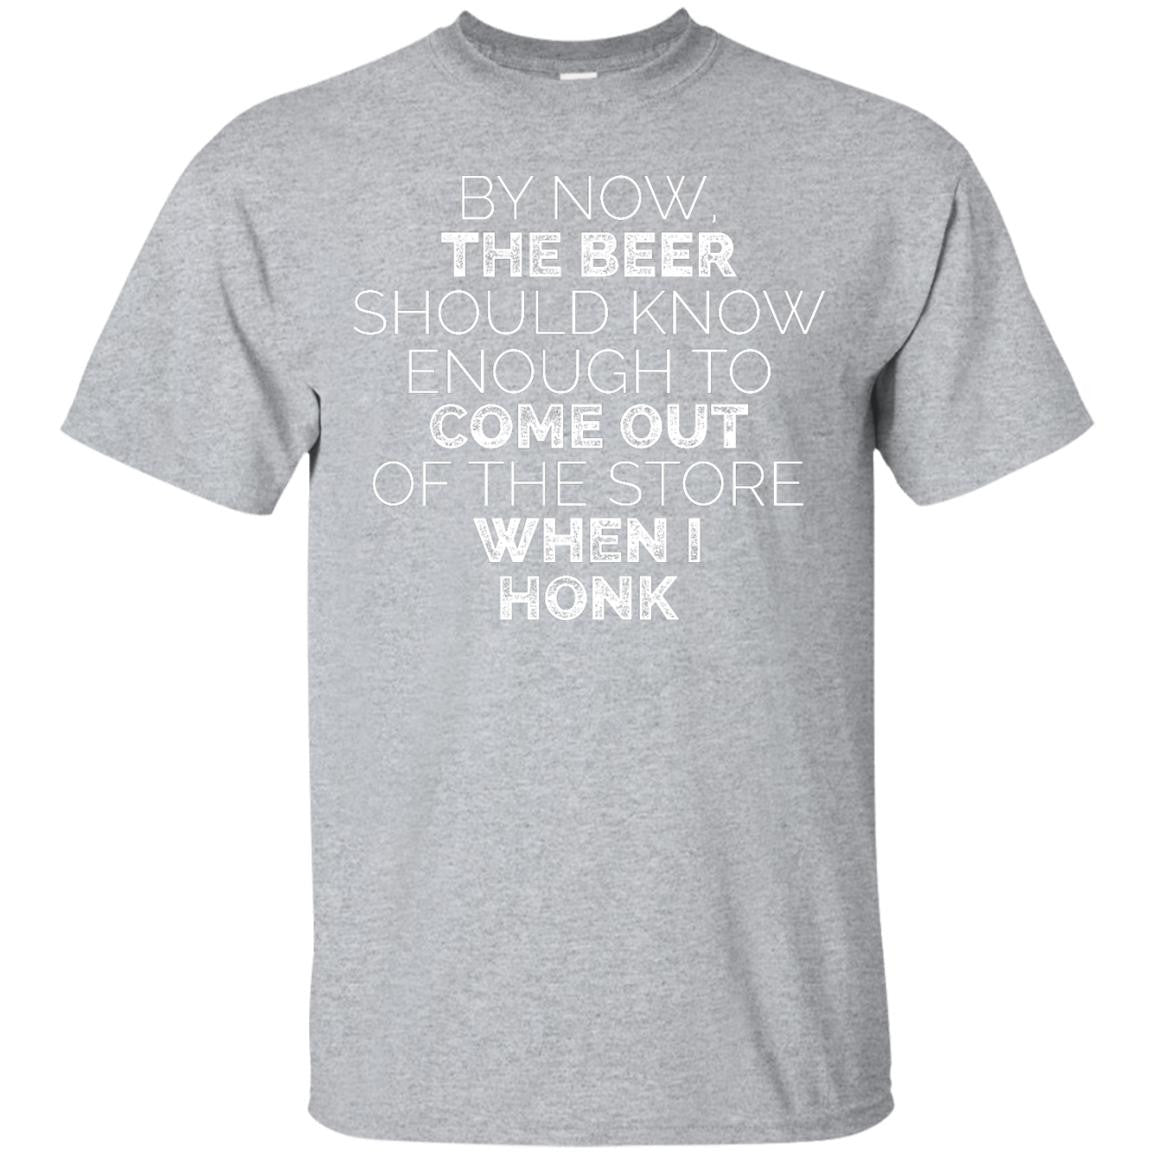 By Now, The Beer Should Know Enough To Come Out Of The Store When I Honk T-Shirt Apparel - The Beer Lodge